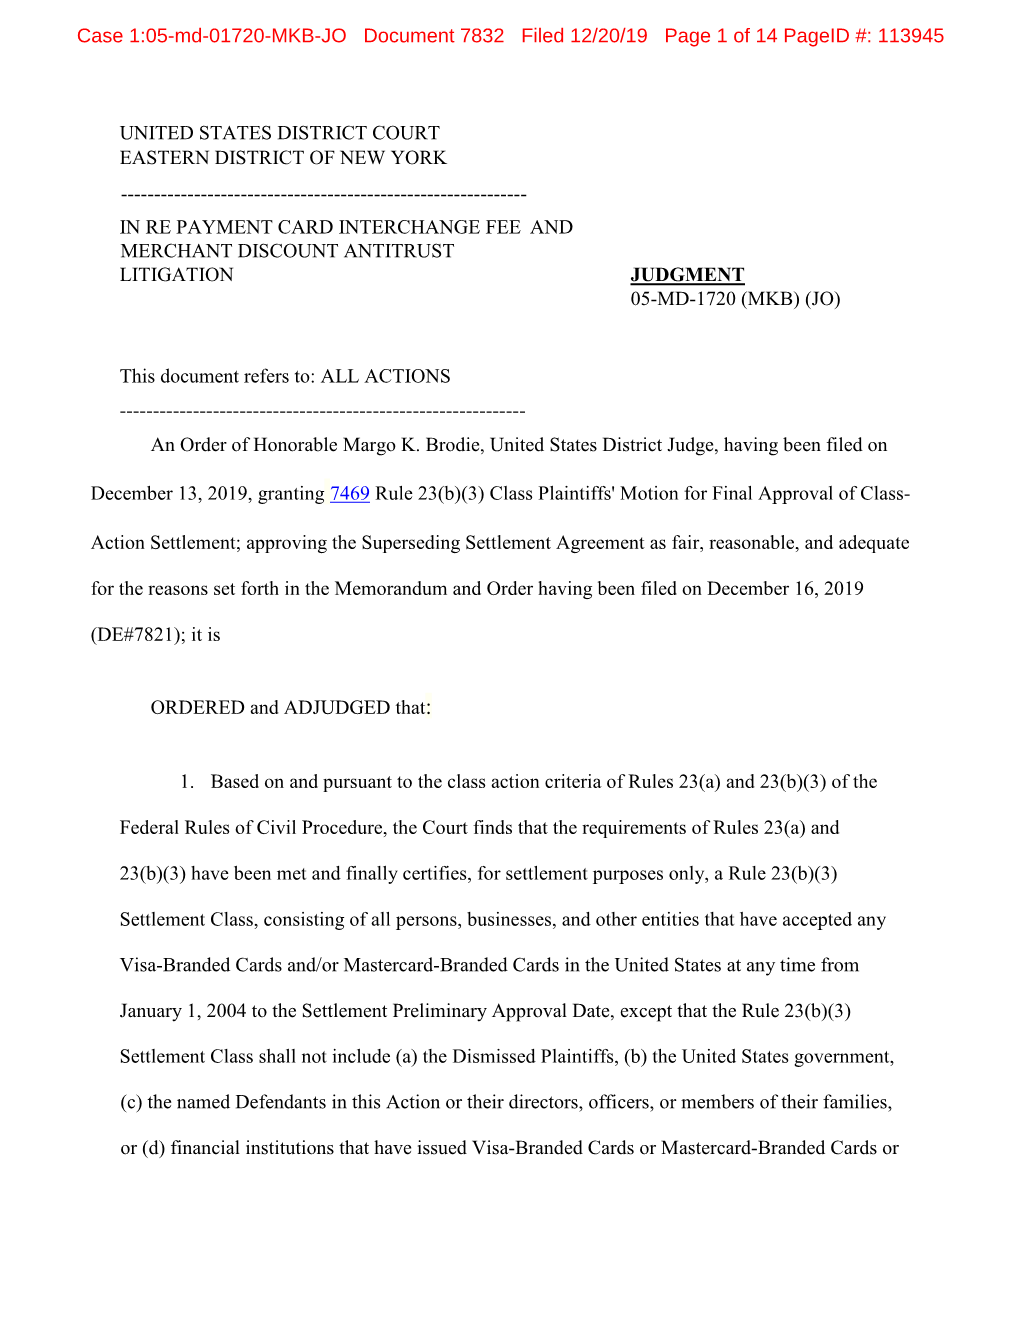 Settlement Order and Final Judgment